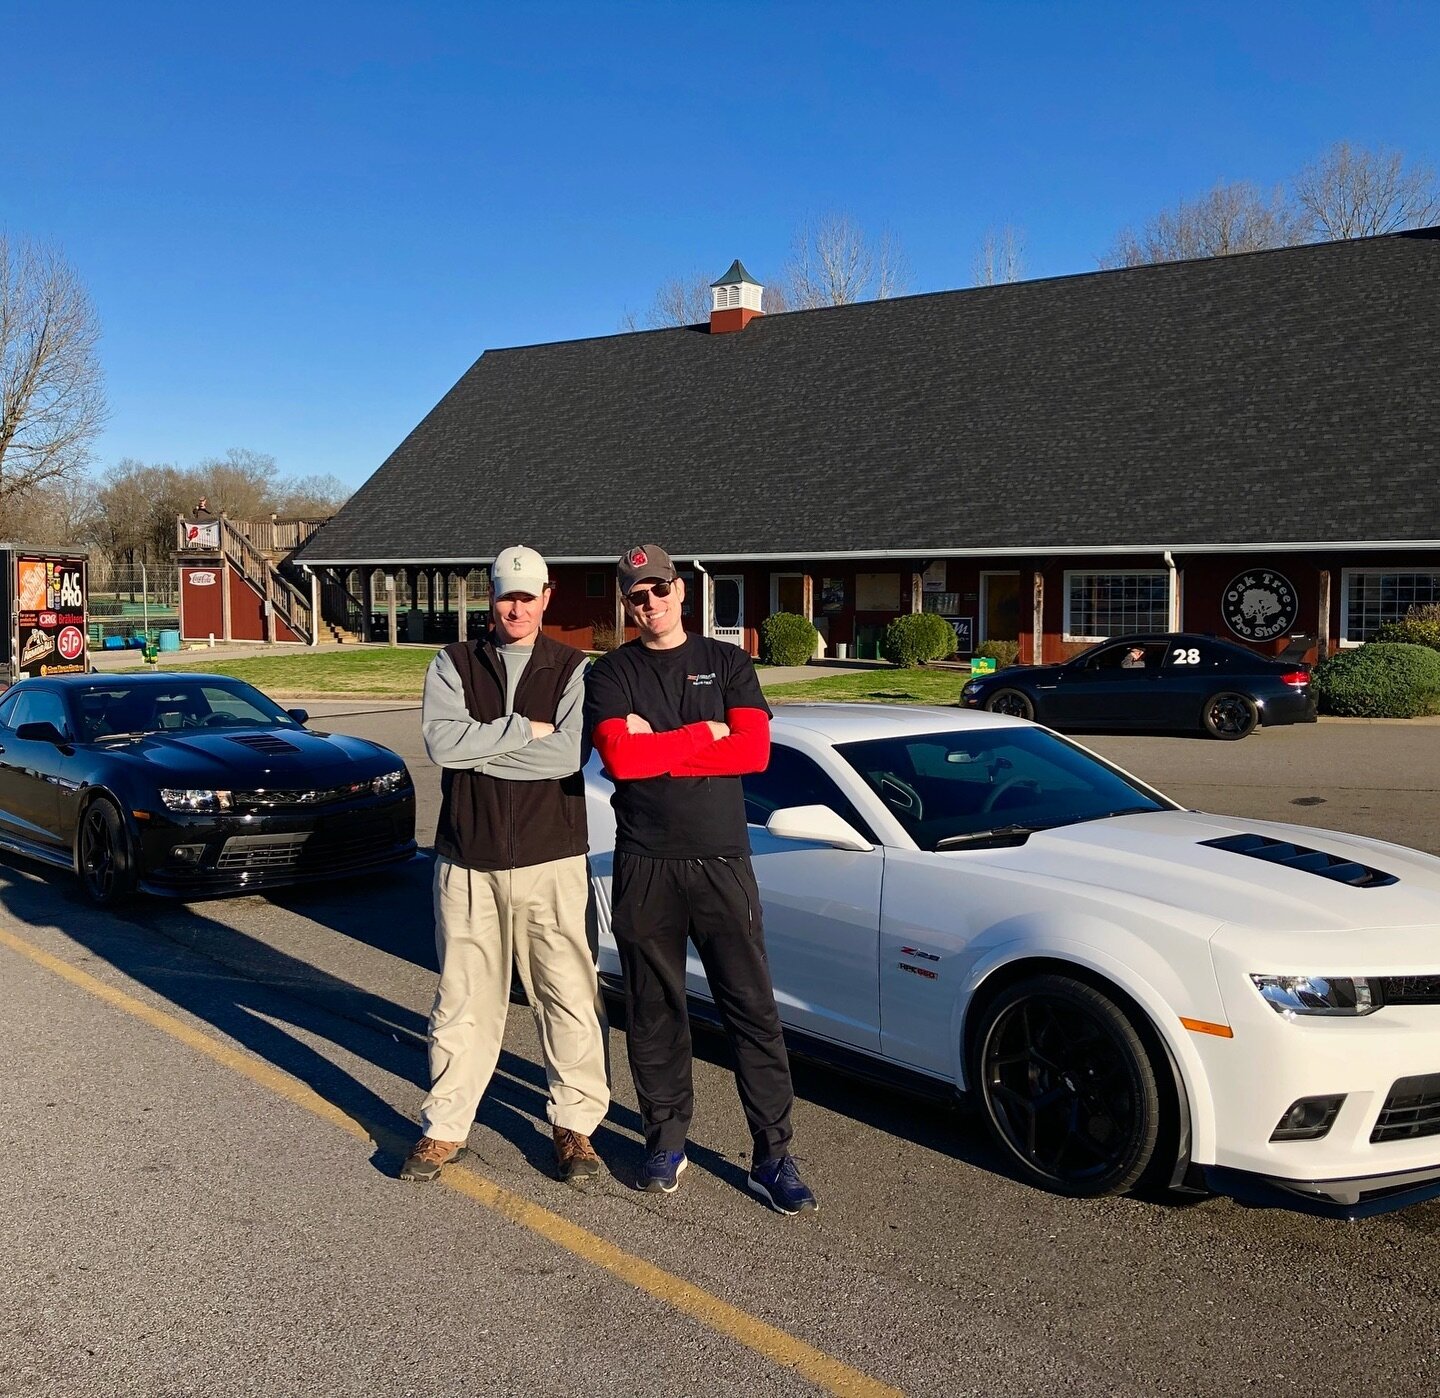 Happy Birthday Dave! 

This picture was taken in March 2018 the first time we took our cars on track ￼during the @victoryjunction charity lap event at @virnow .  One of many fun days I had with my brother out racing, making memories and living life.
